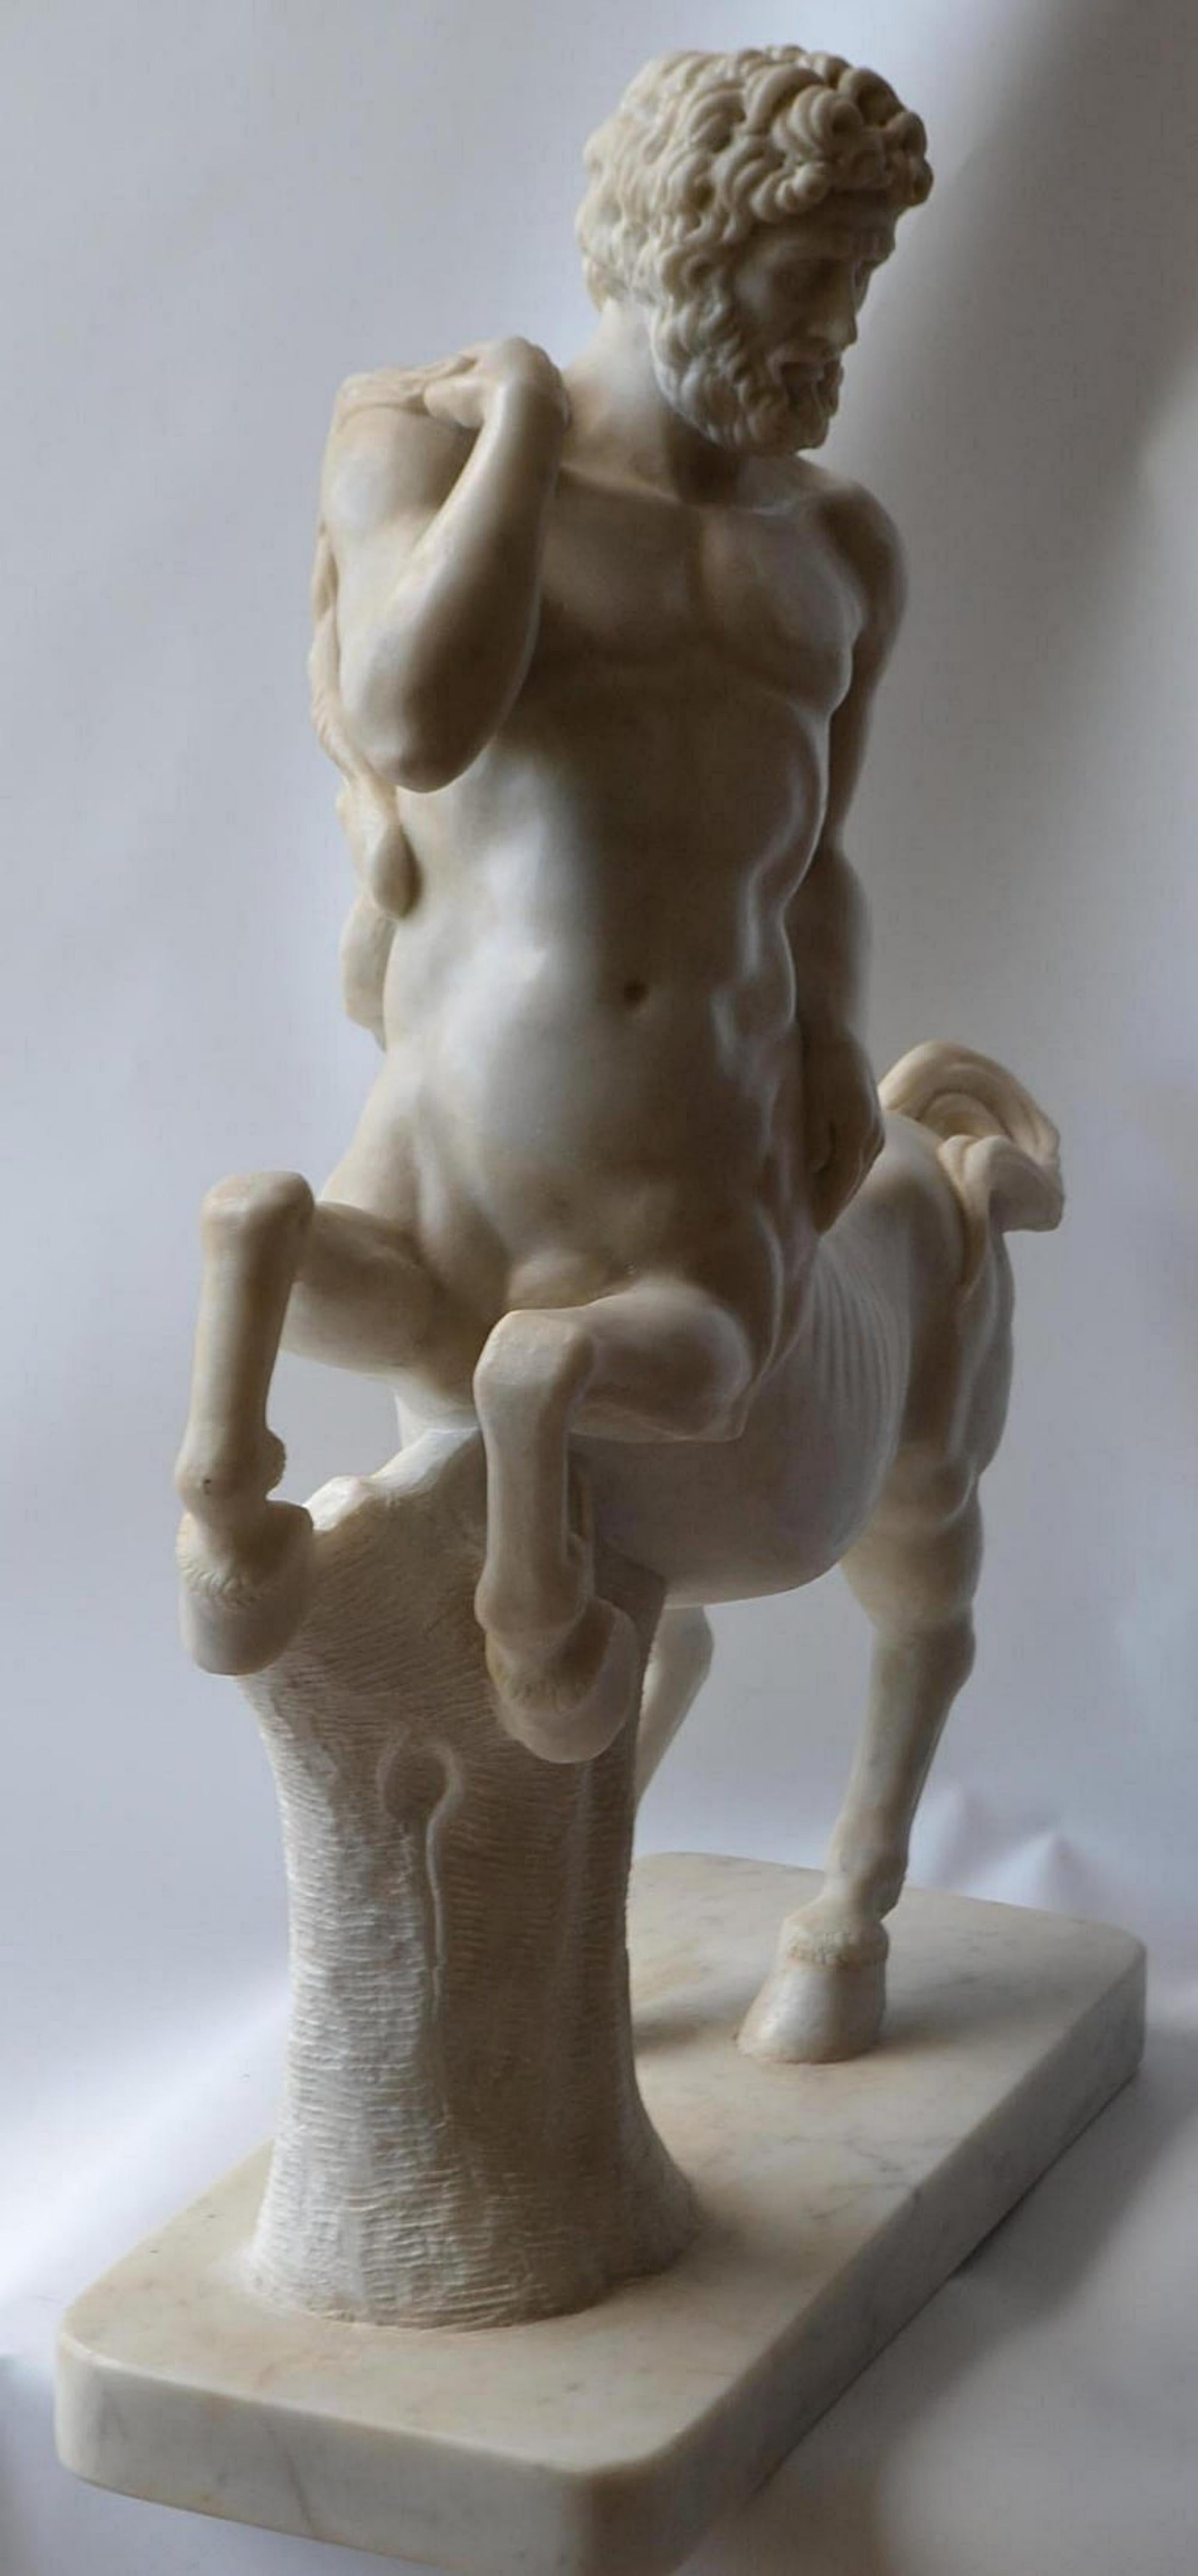 Amazing centaur carved in Carrara marble.
Began 20th century
The centaur is a creature from Greek mythology.
This mythological creature, half man and half horse, had the particularity of possessing all the virtues and all the defects of